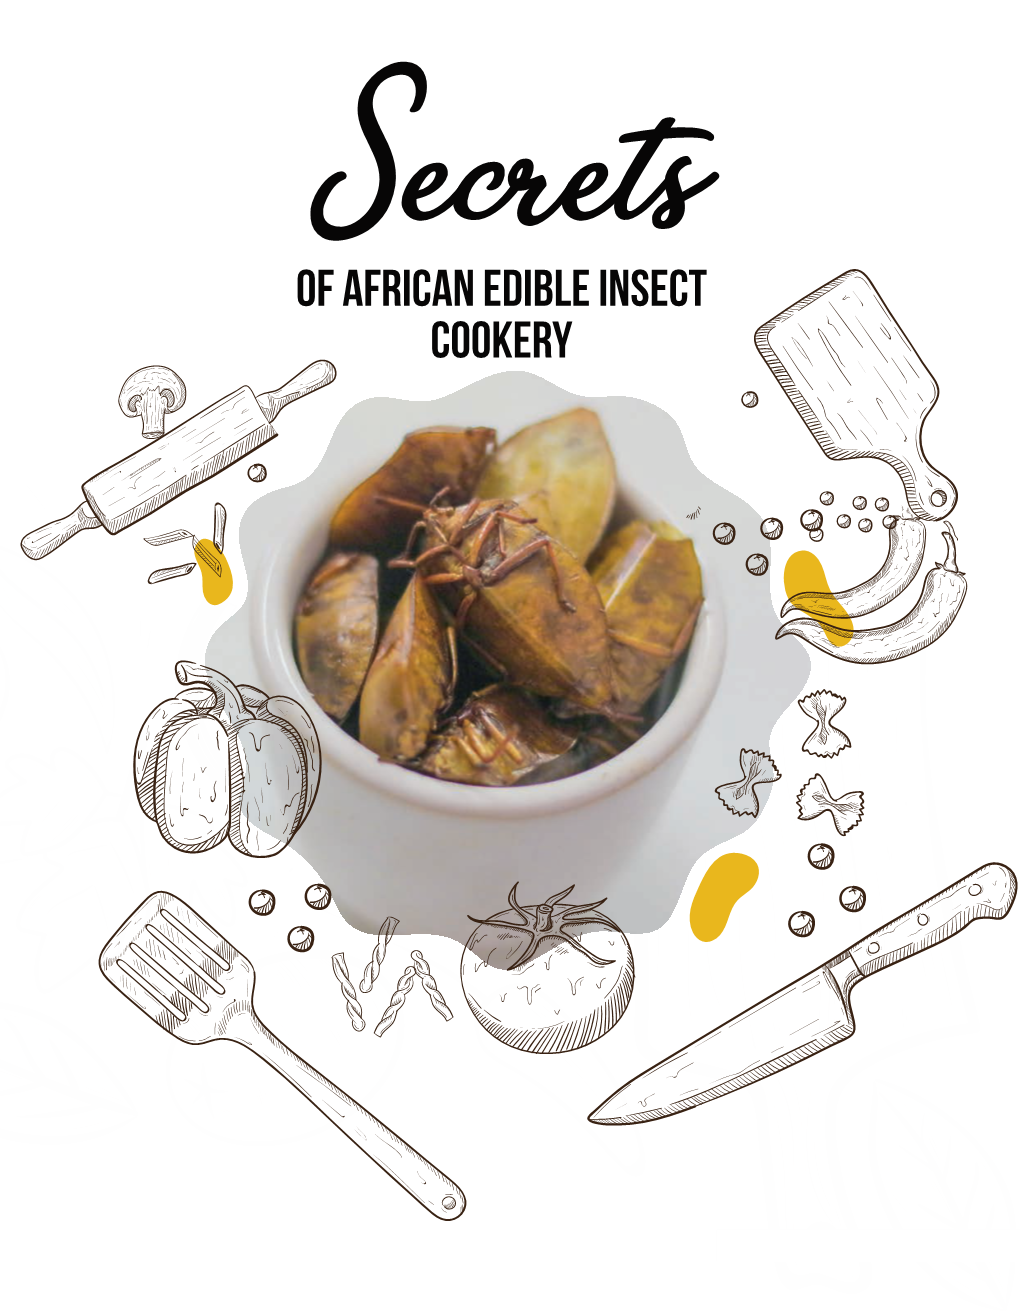 Secrets of African Edible Insect Cookery